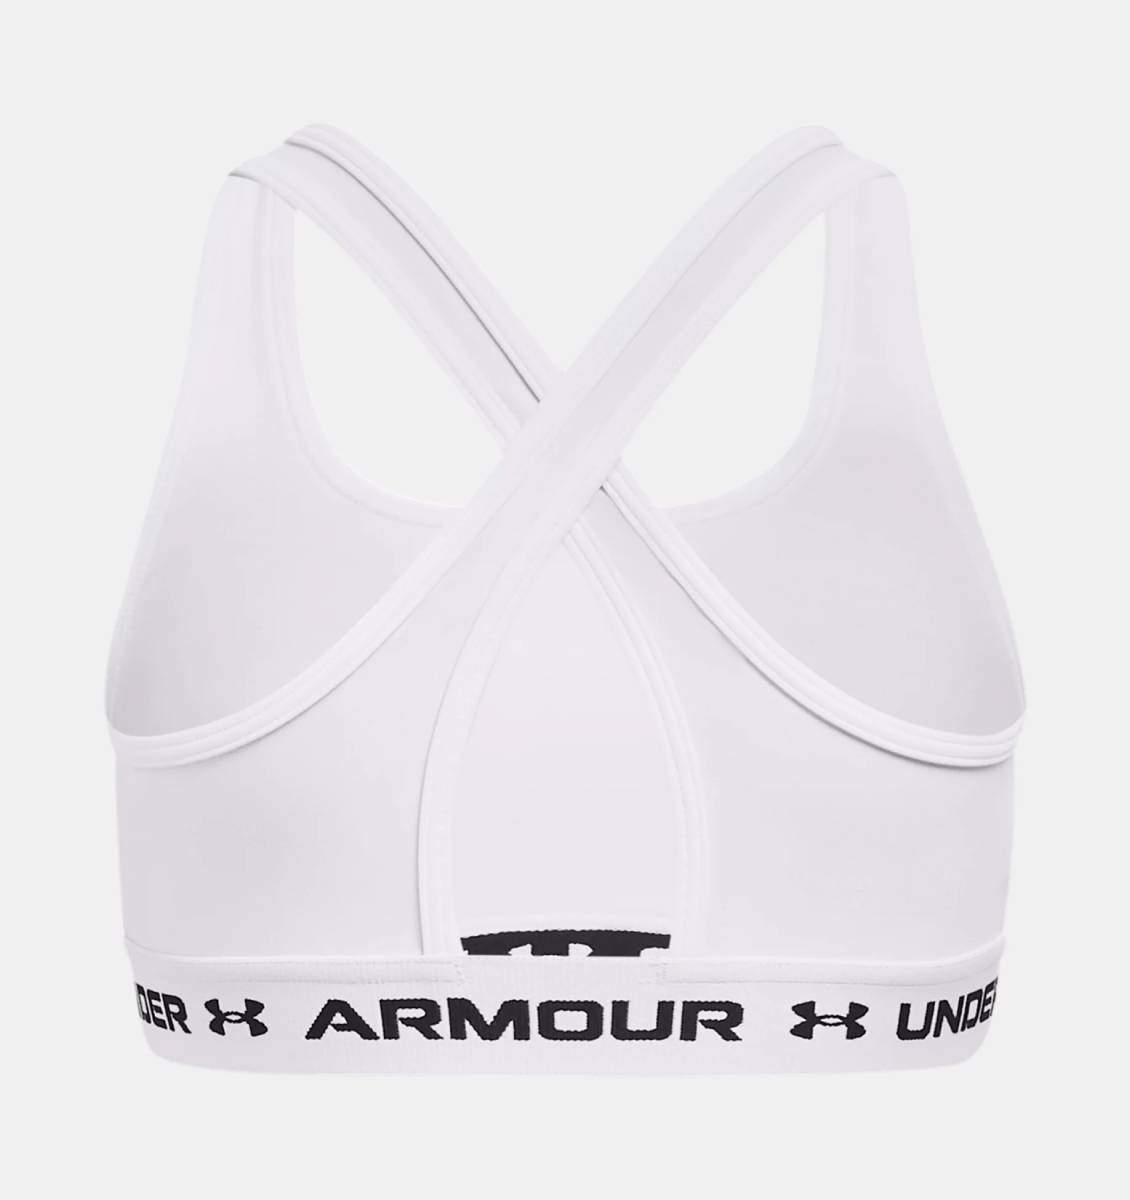 Womens sports bra with support Under Armour CROSSBACK LOW W white